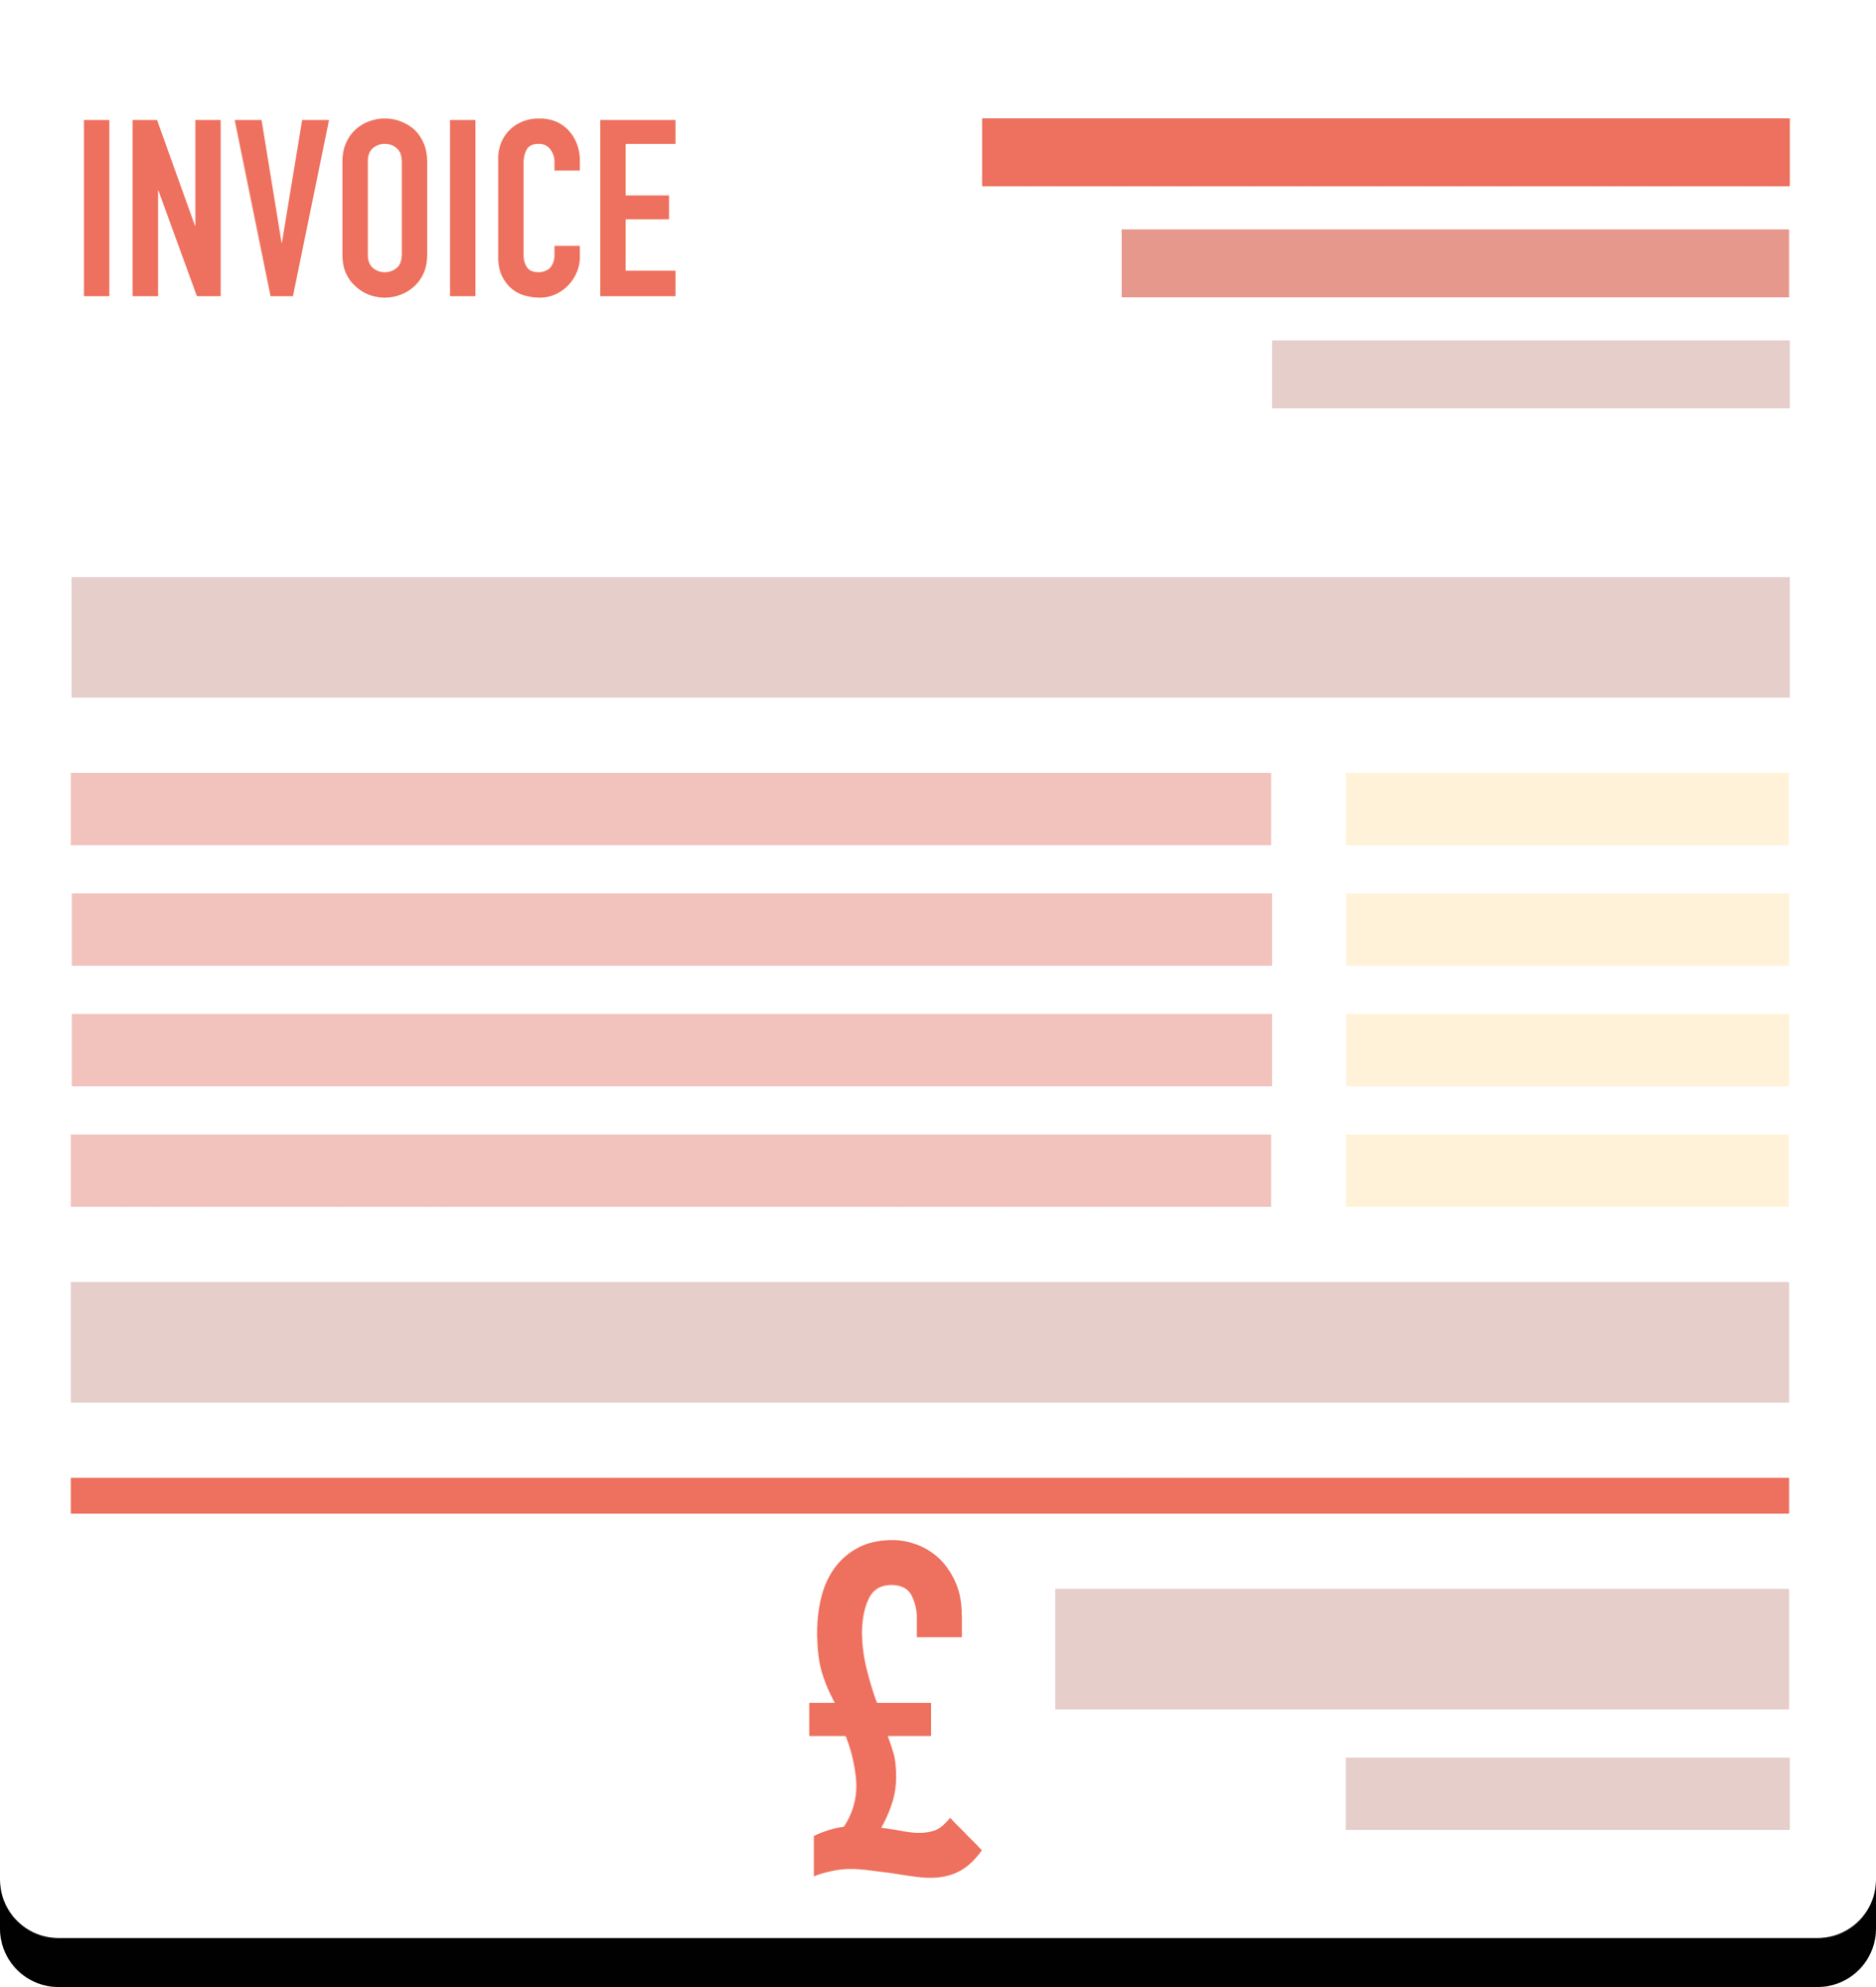 Invoice Template for Cleaning Companies